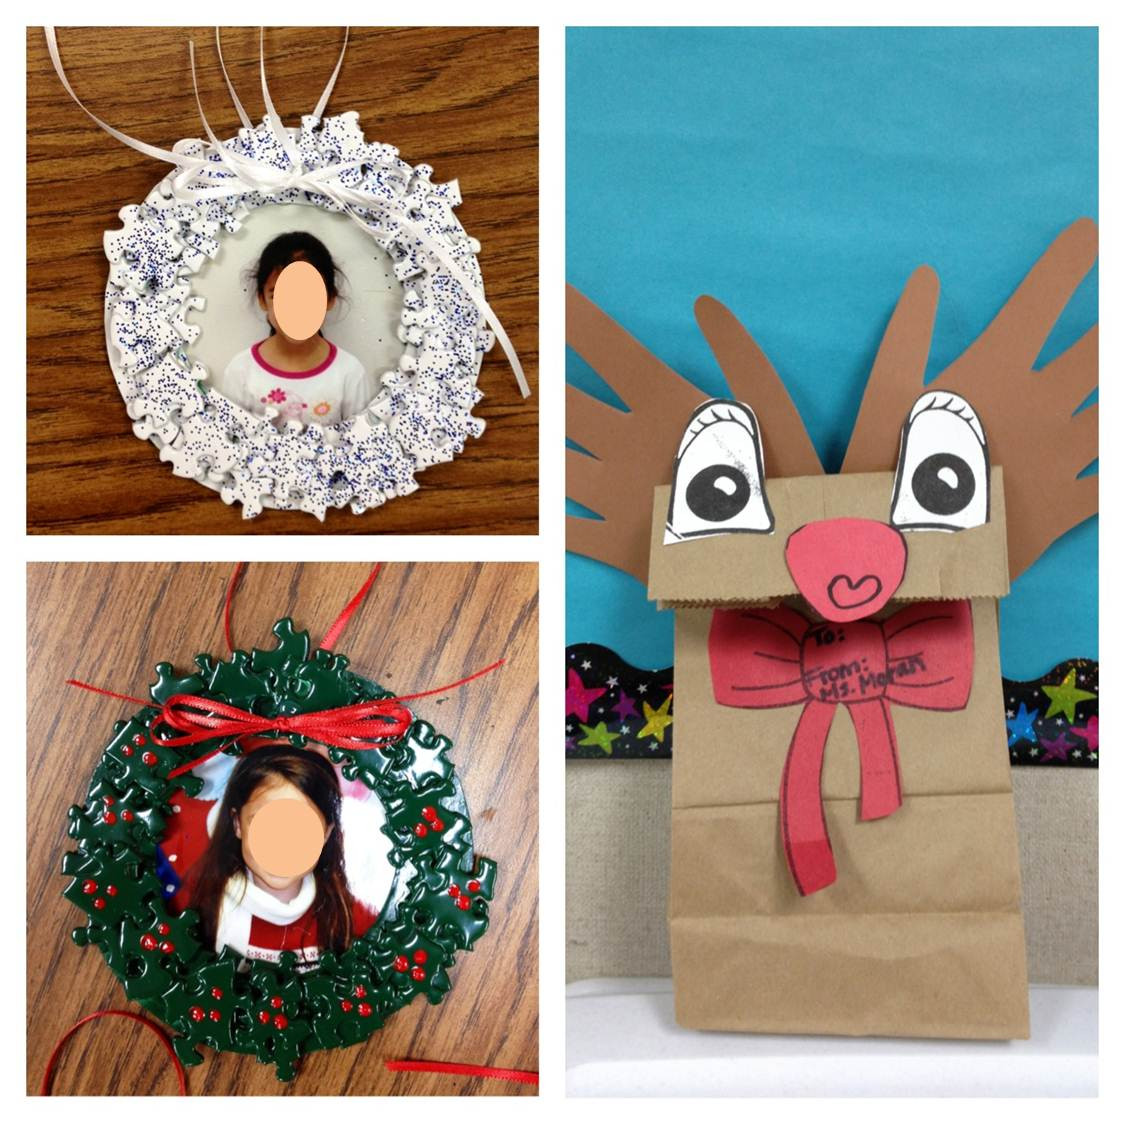 Christmas Present Ideas For Parents
 Susan Jones Teaching Parent & Student Holiday Gifts